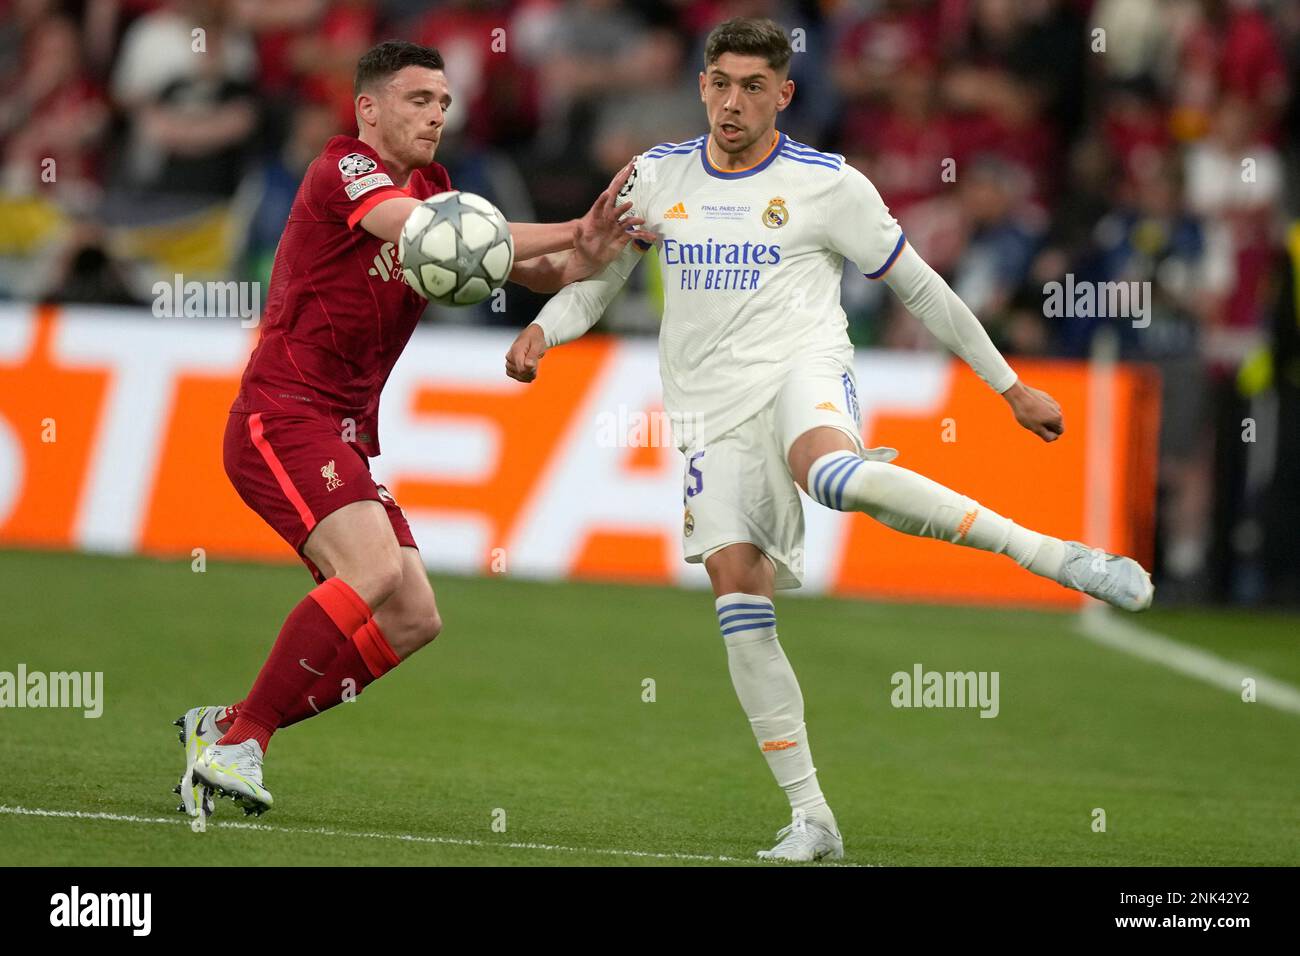 Liverpool's Andrew Robertson heads the ball during the Champions League  final soccer match between Liverpool and Real Madrid at the Stade de France  in Saint Denis near Paris, Saturday, May 28, 2022. (